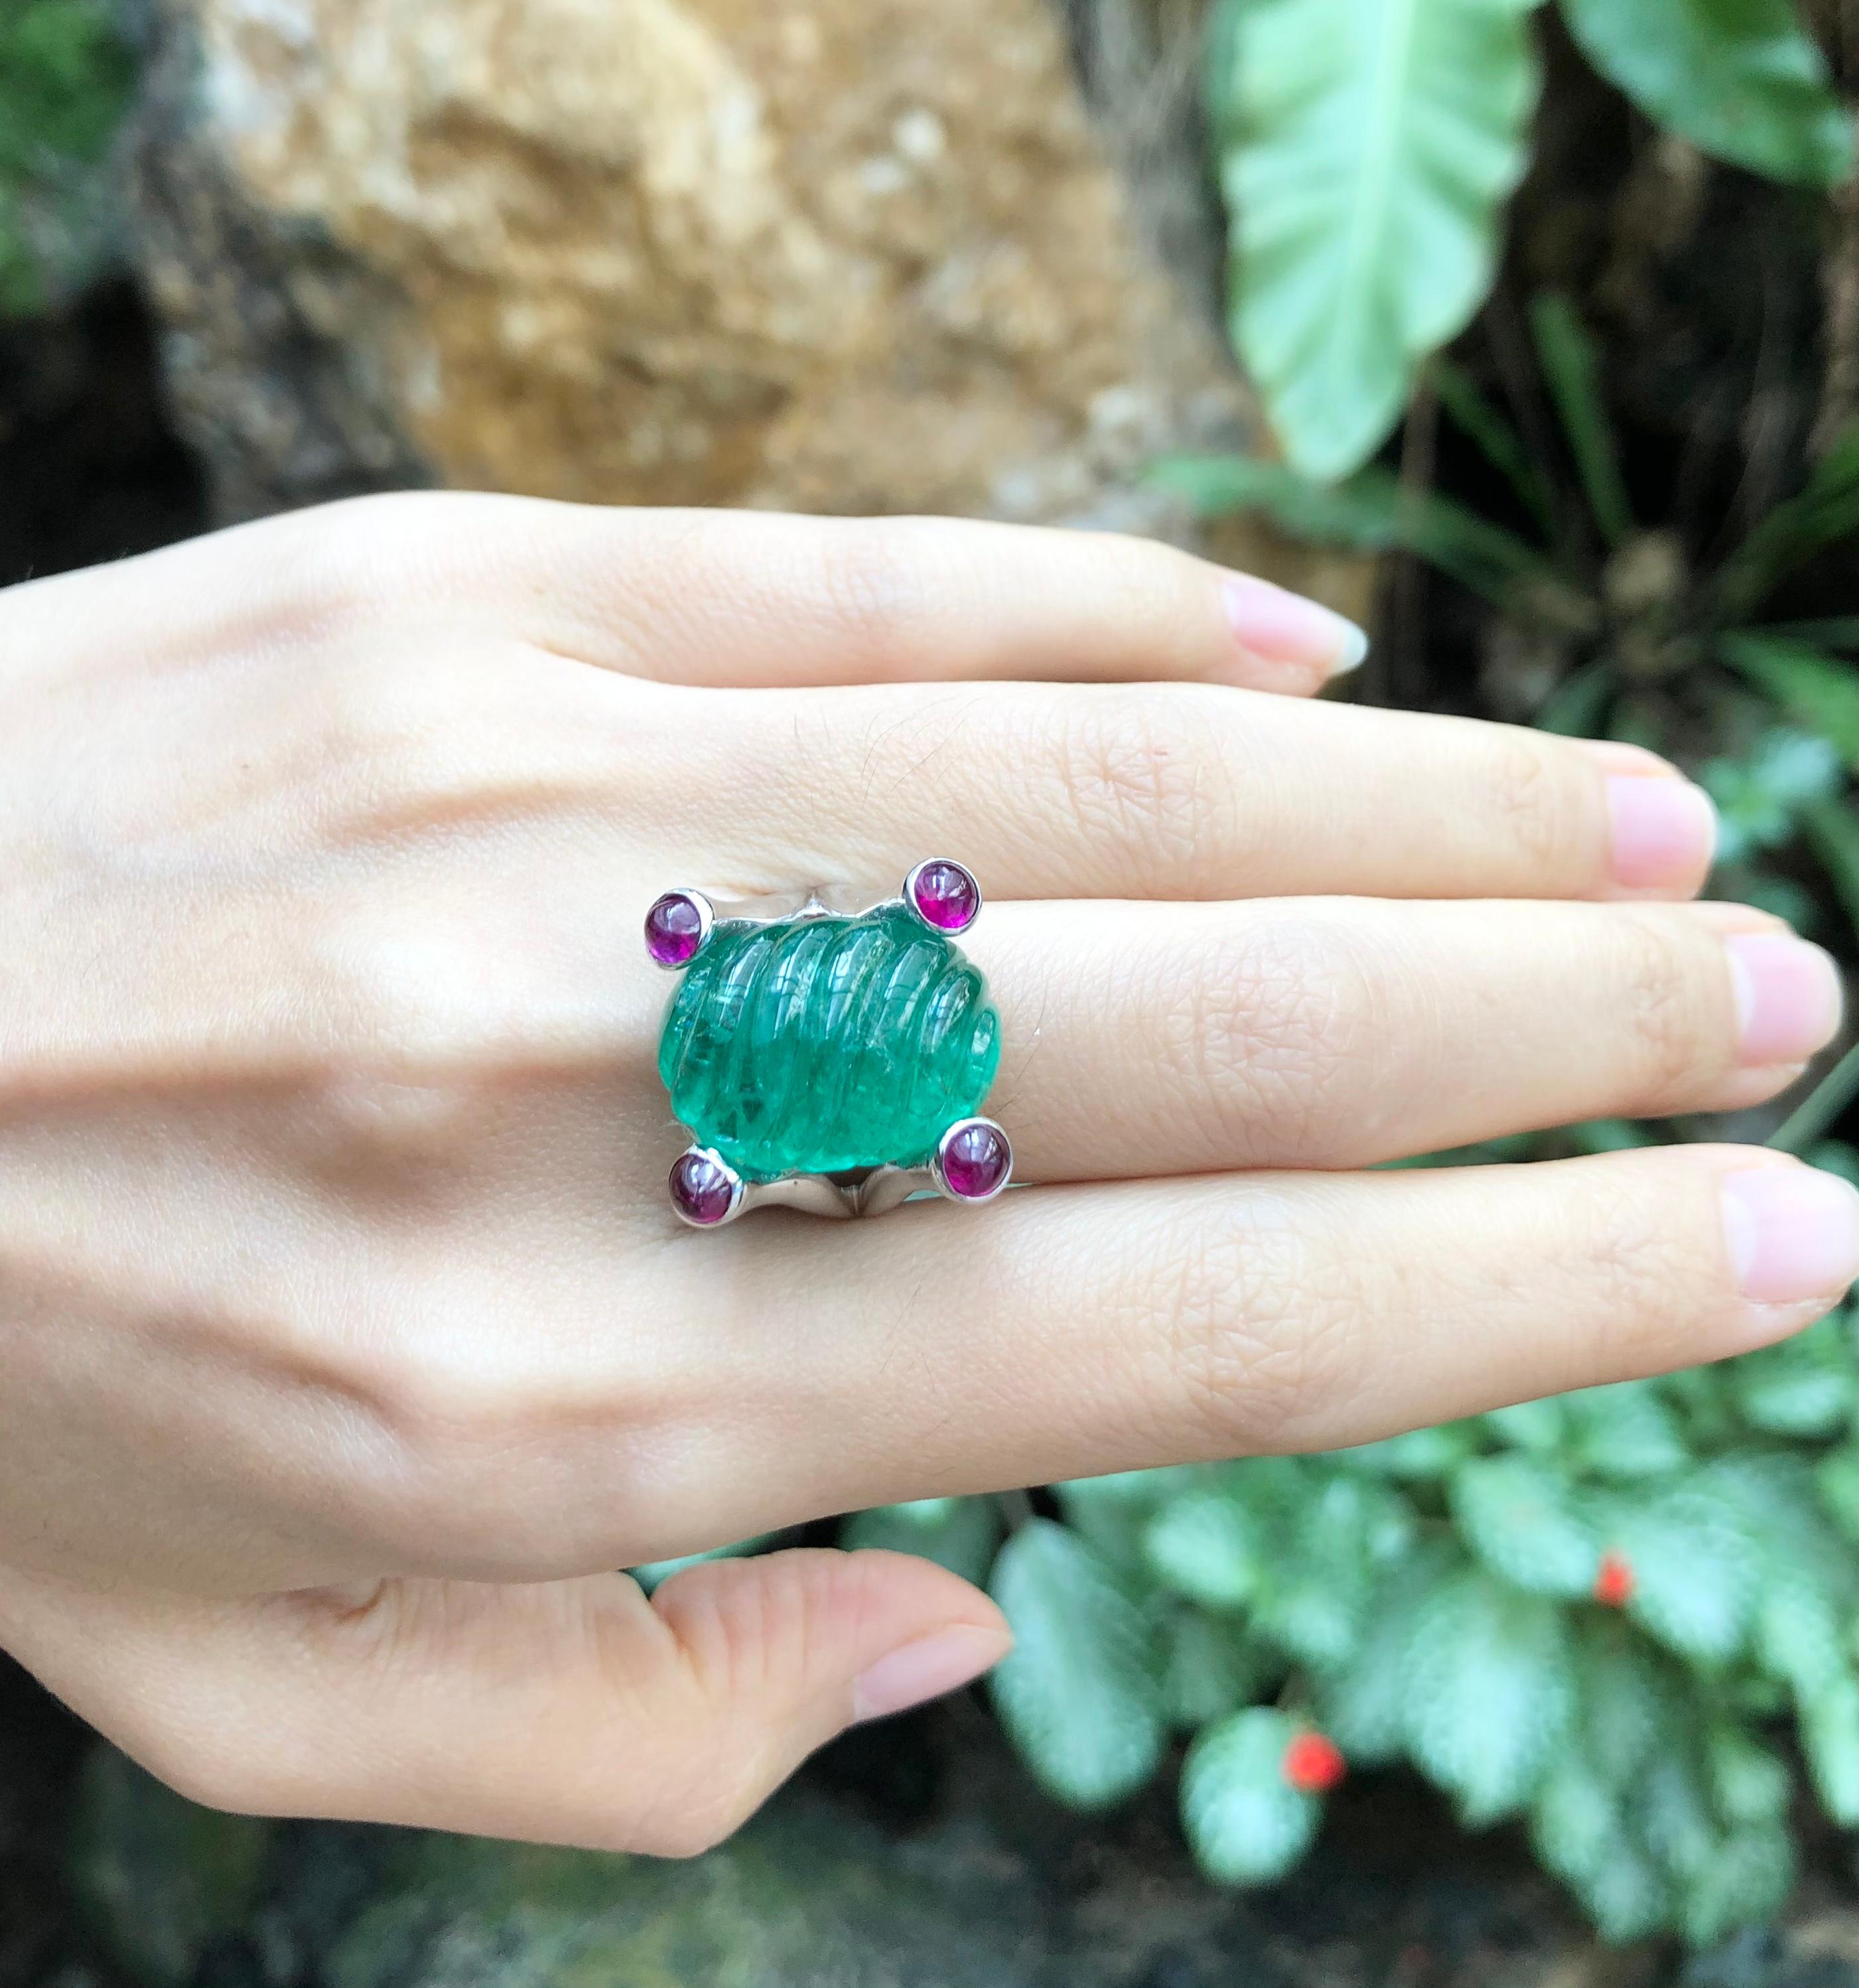 Cabochon Emerald 18.31 carats with Cabochon Ruby 1.66 carats Ring set in 18 Karat White Gold Settings

Width:  1.9 cm 
Length: 1.9 cm
Ring Size: 52
Total Weight: 11.96 grams

